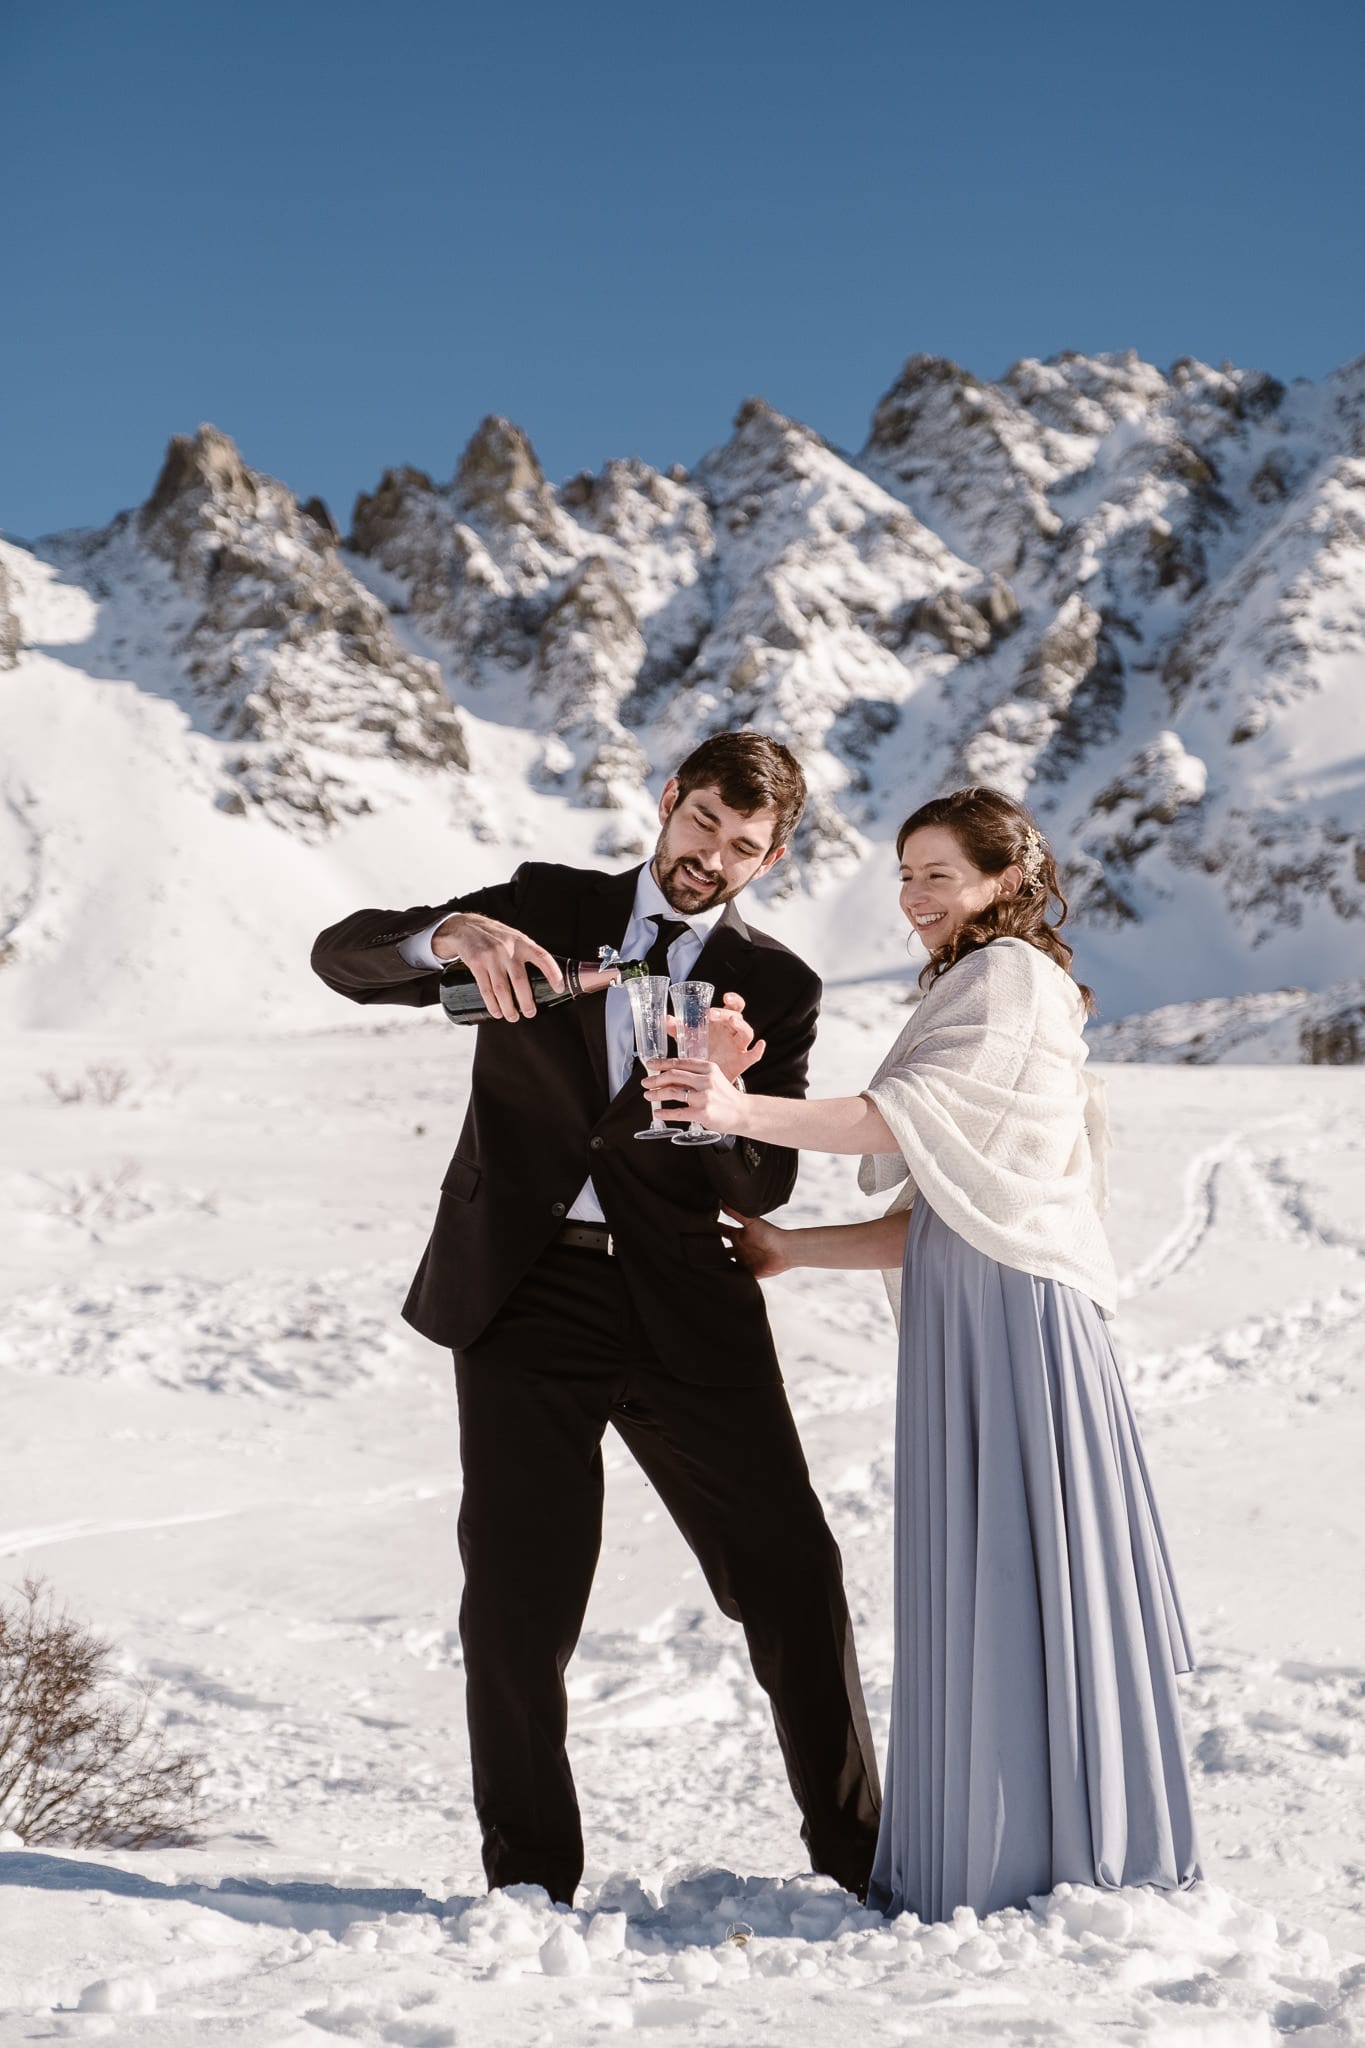 Bride and groom popping champagne bottle, winter mountain elopement, Colorado ski wedding, backcountry skiing elopement